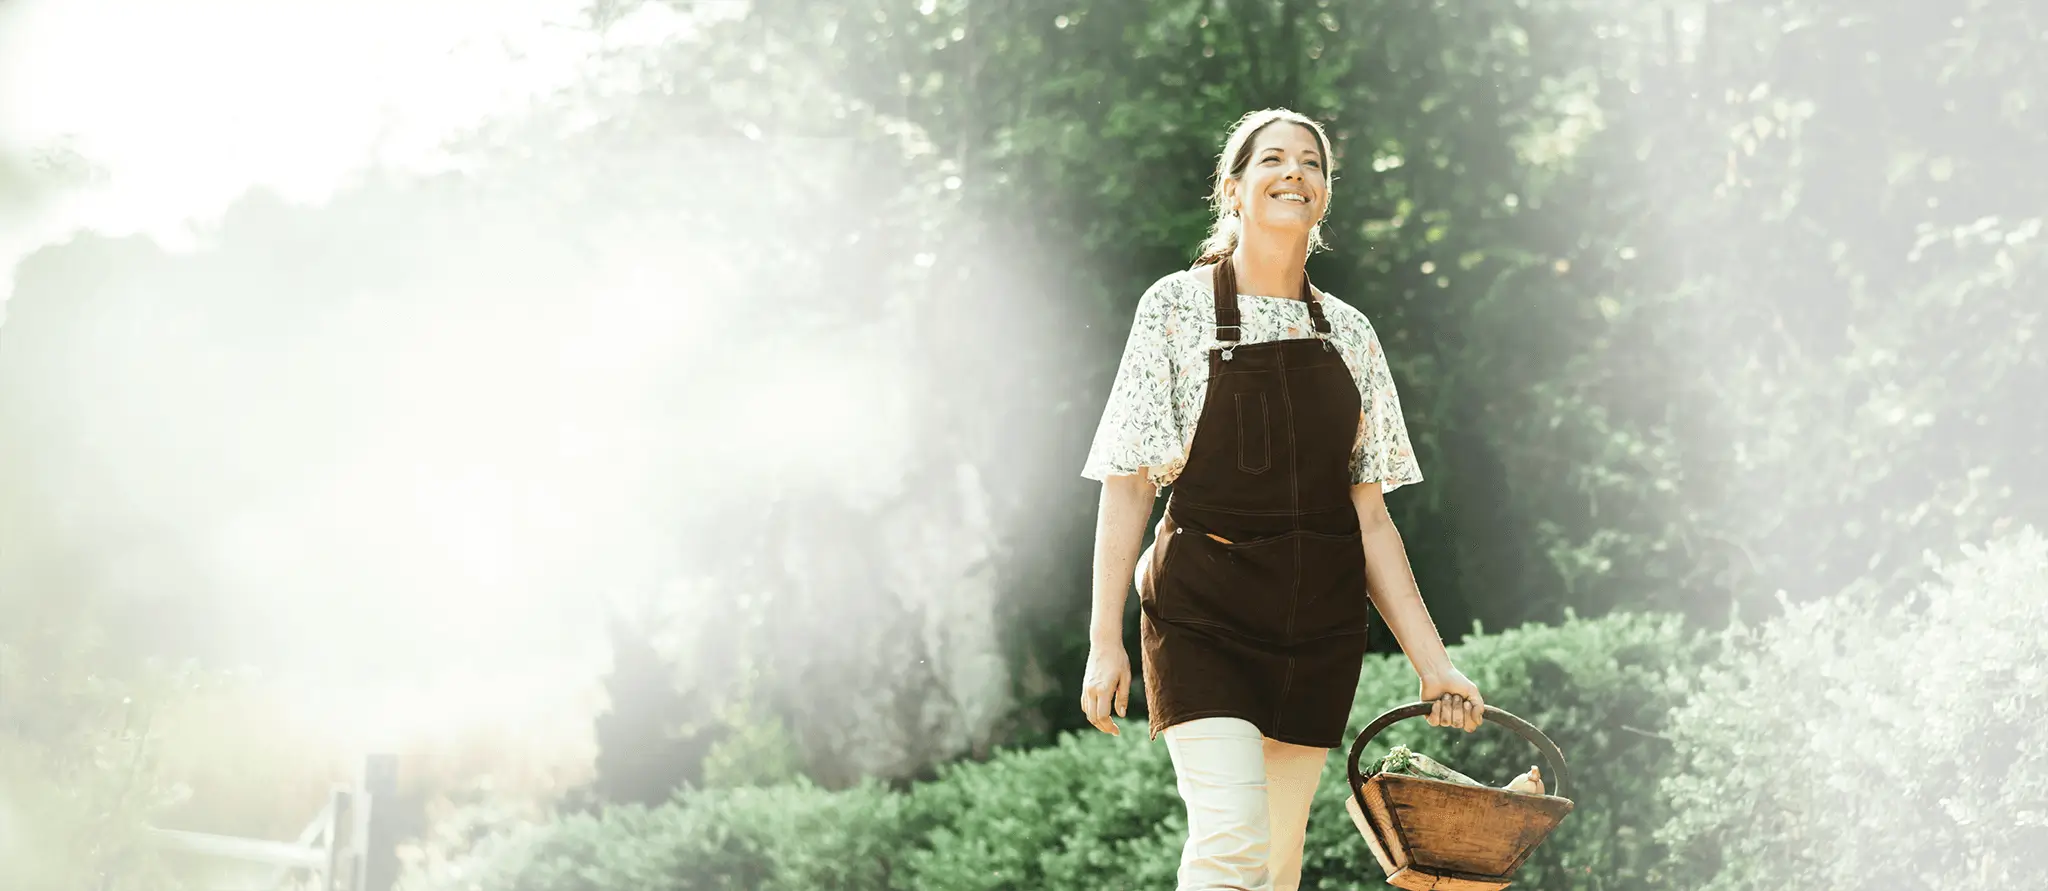 A smiling woman wearing gardening coveralls walks outside, holding a basket.